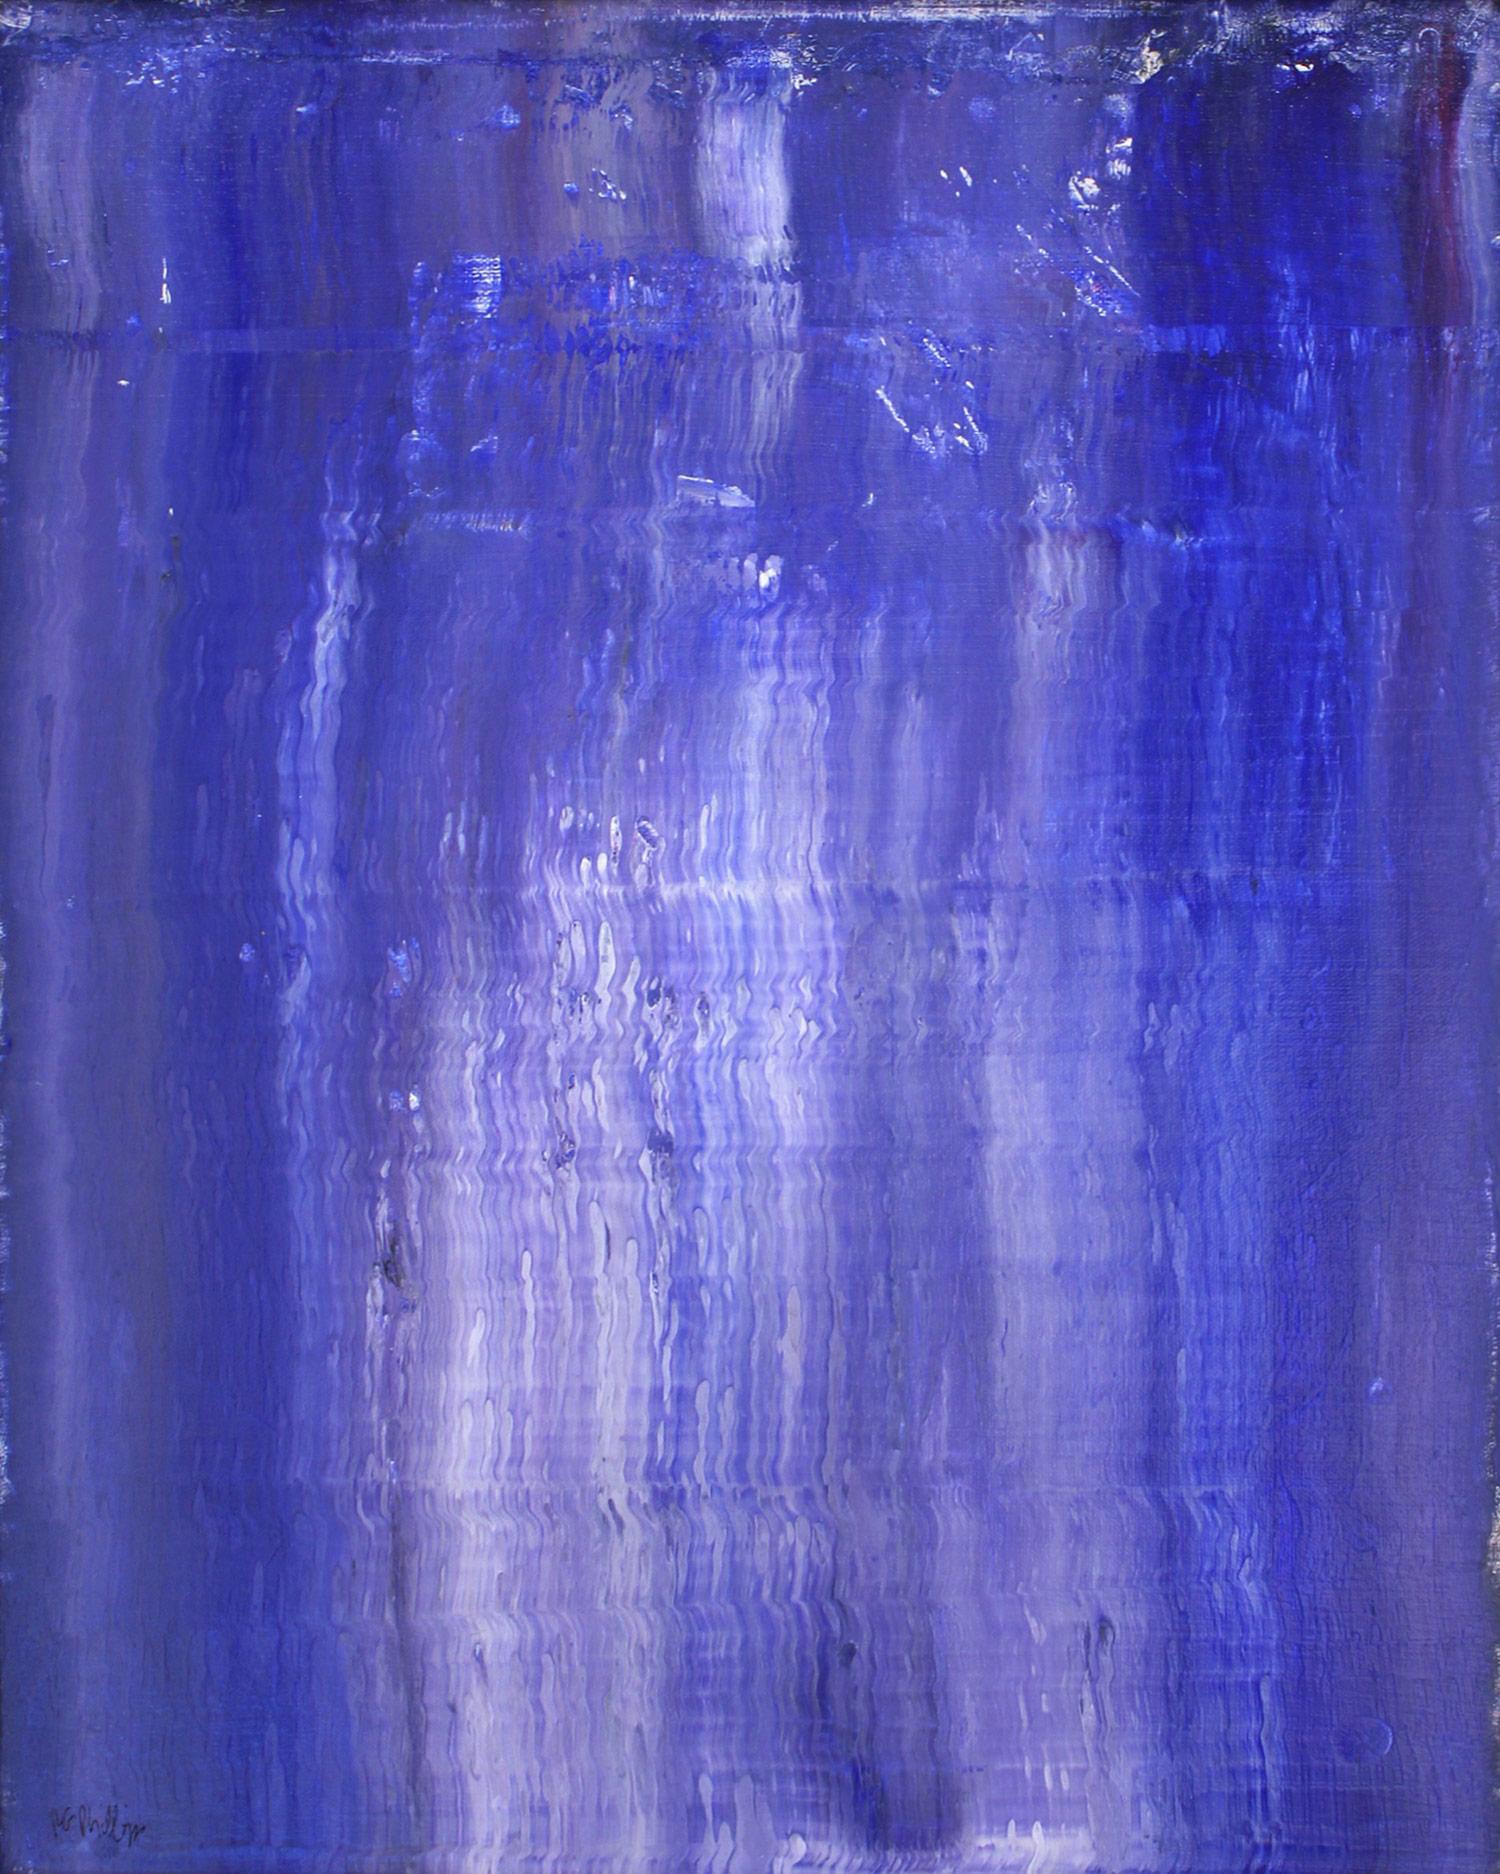 Vertical Relationships of Blue - Painting by Robert Gregory Phillips